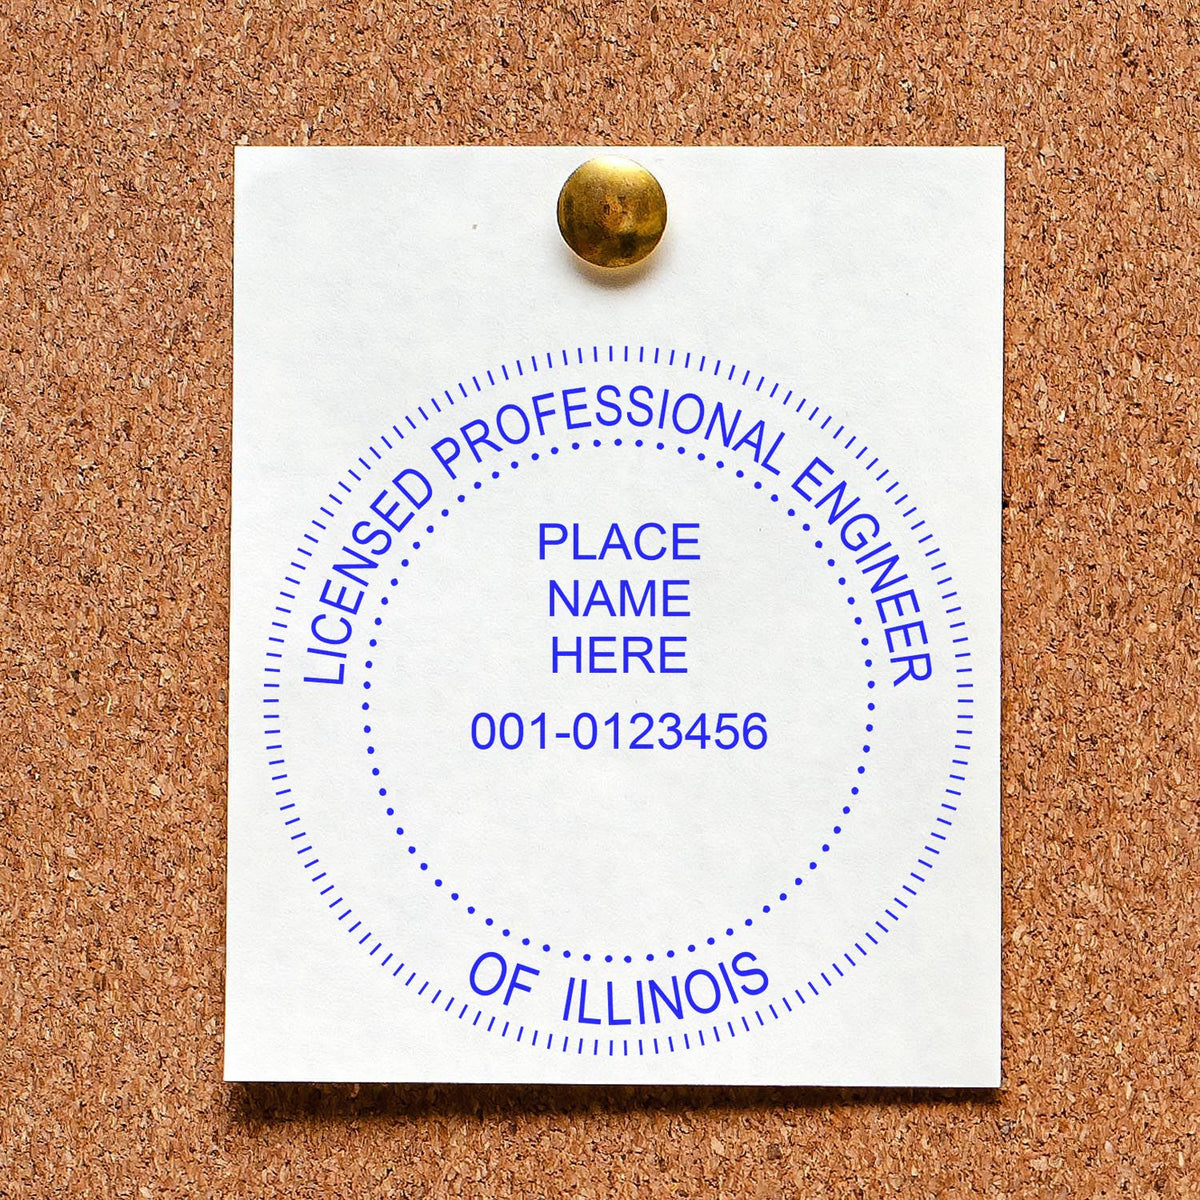 A lifestyle photo showing a stamped image of the Premium MaxLight Pre-Inked Illinois Engineering Stamp on a piece of paper